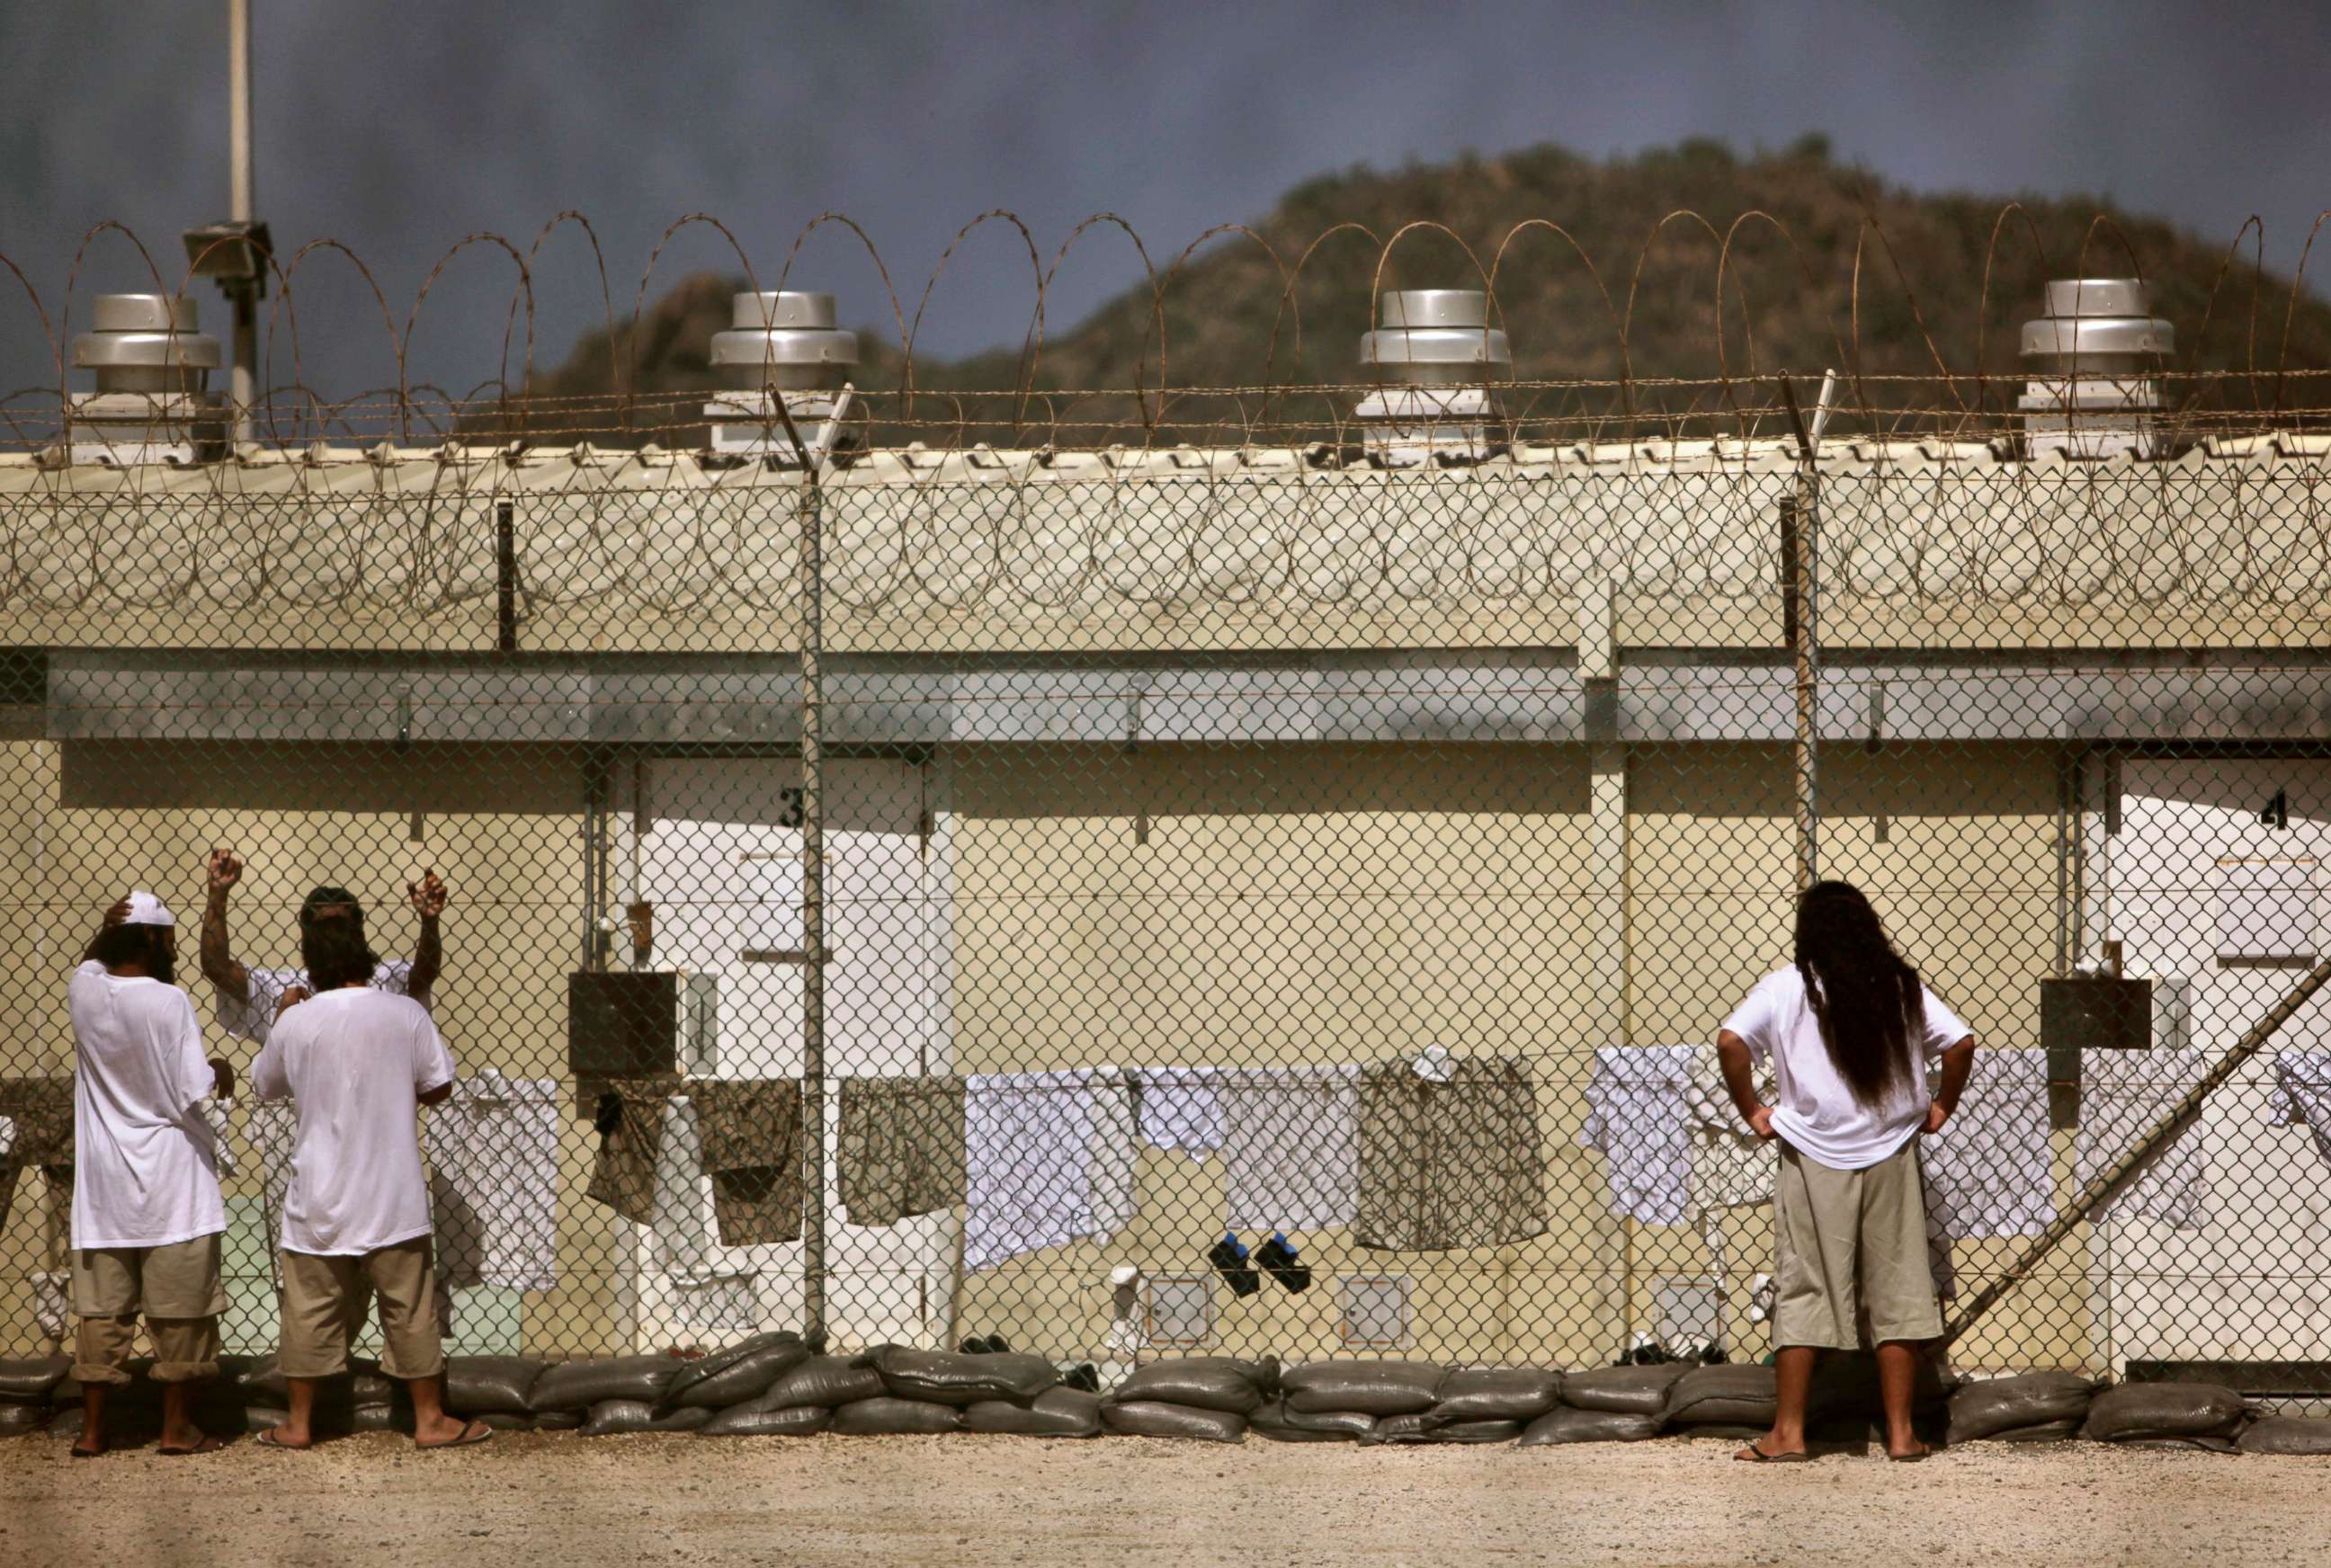 PHOTO: Detainees talk together inside the open-air yard at the Camp 4 detention facility at Guantanamo Bay U.S. Naval Base in Cuba, May 31, 2009.